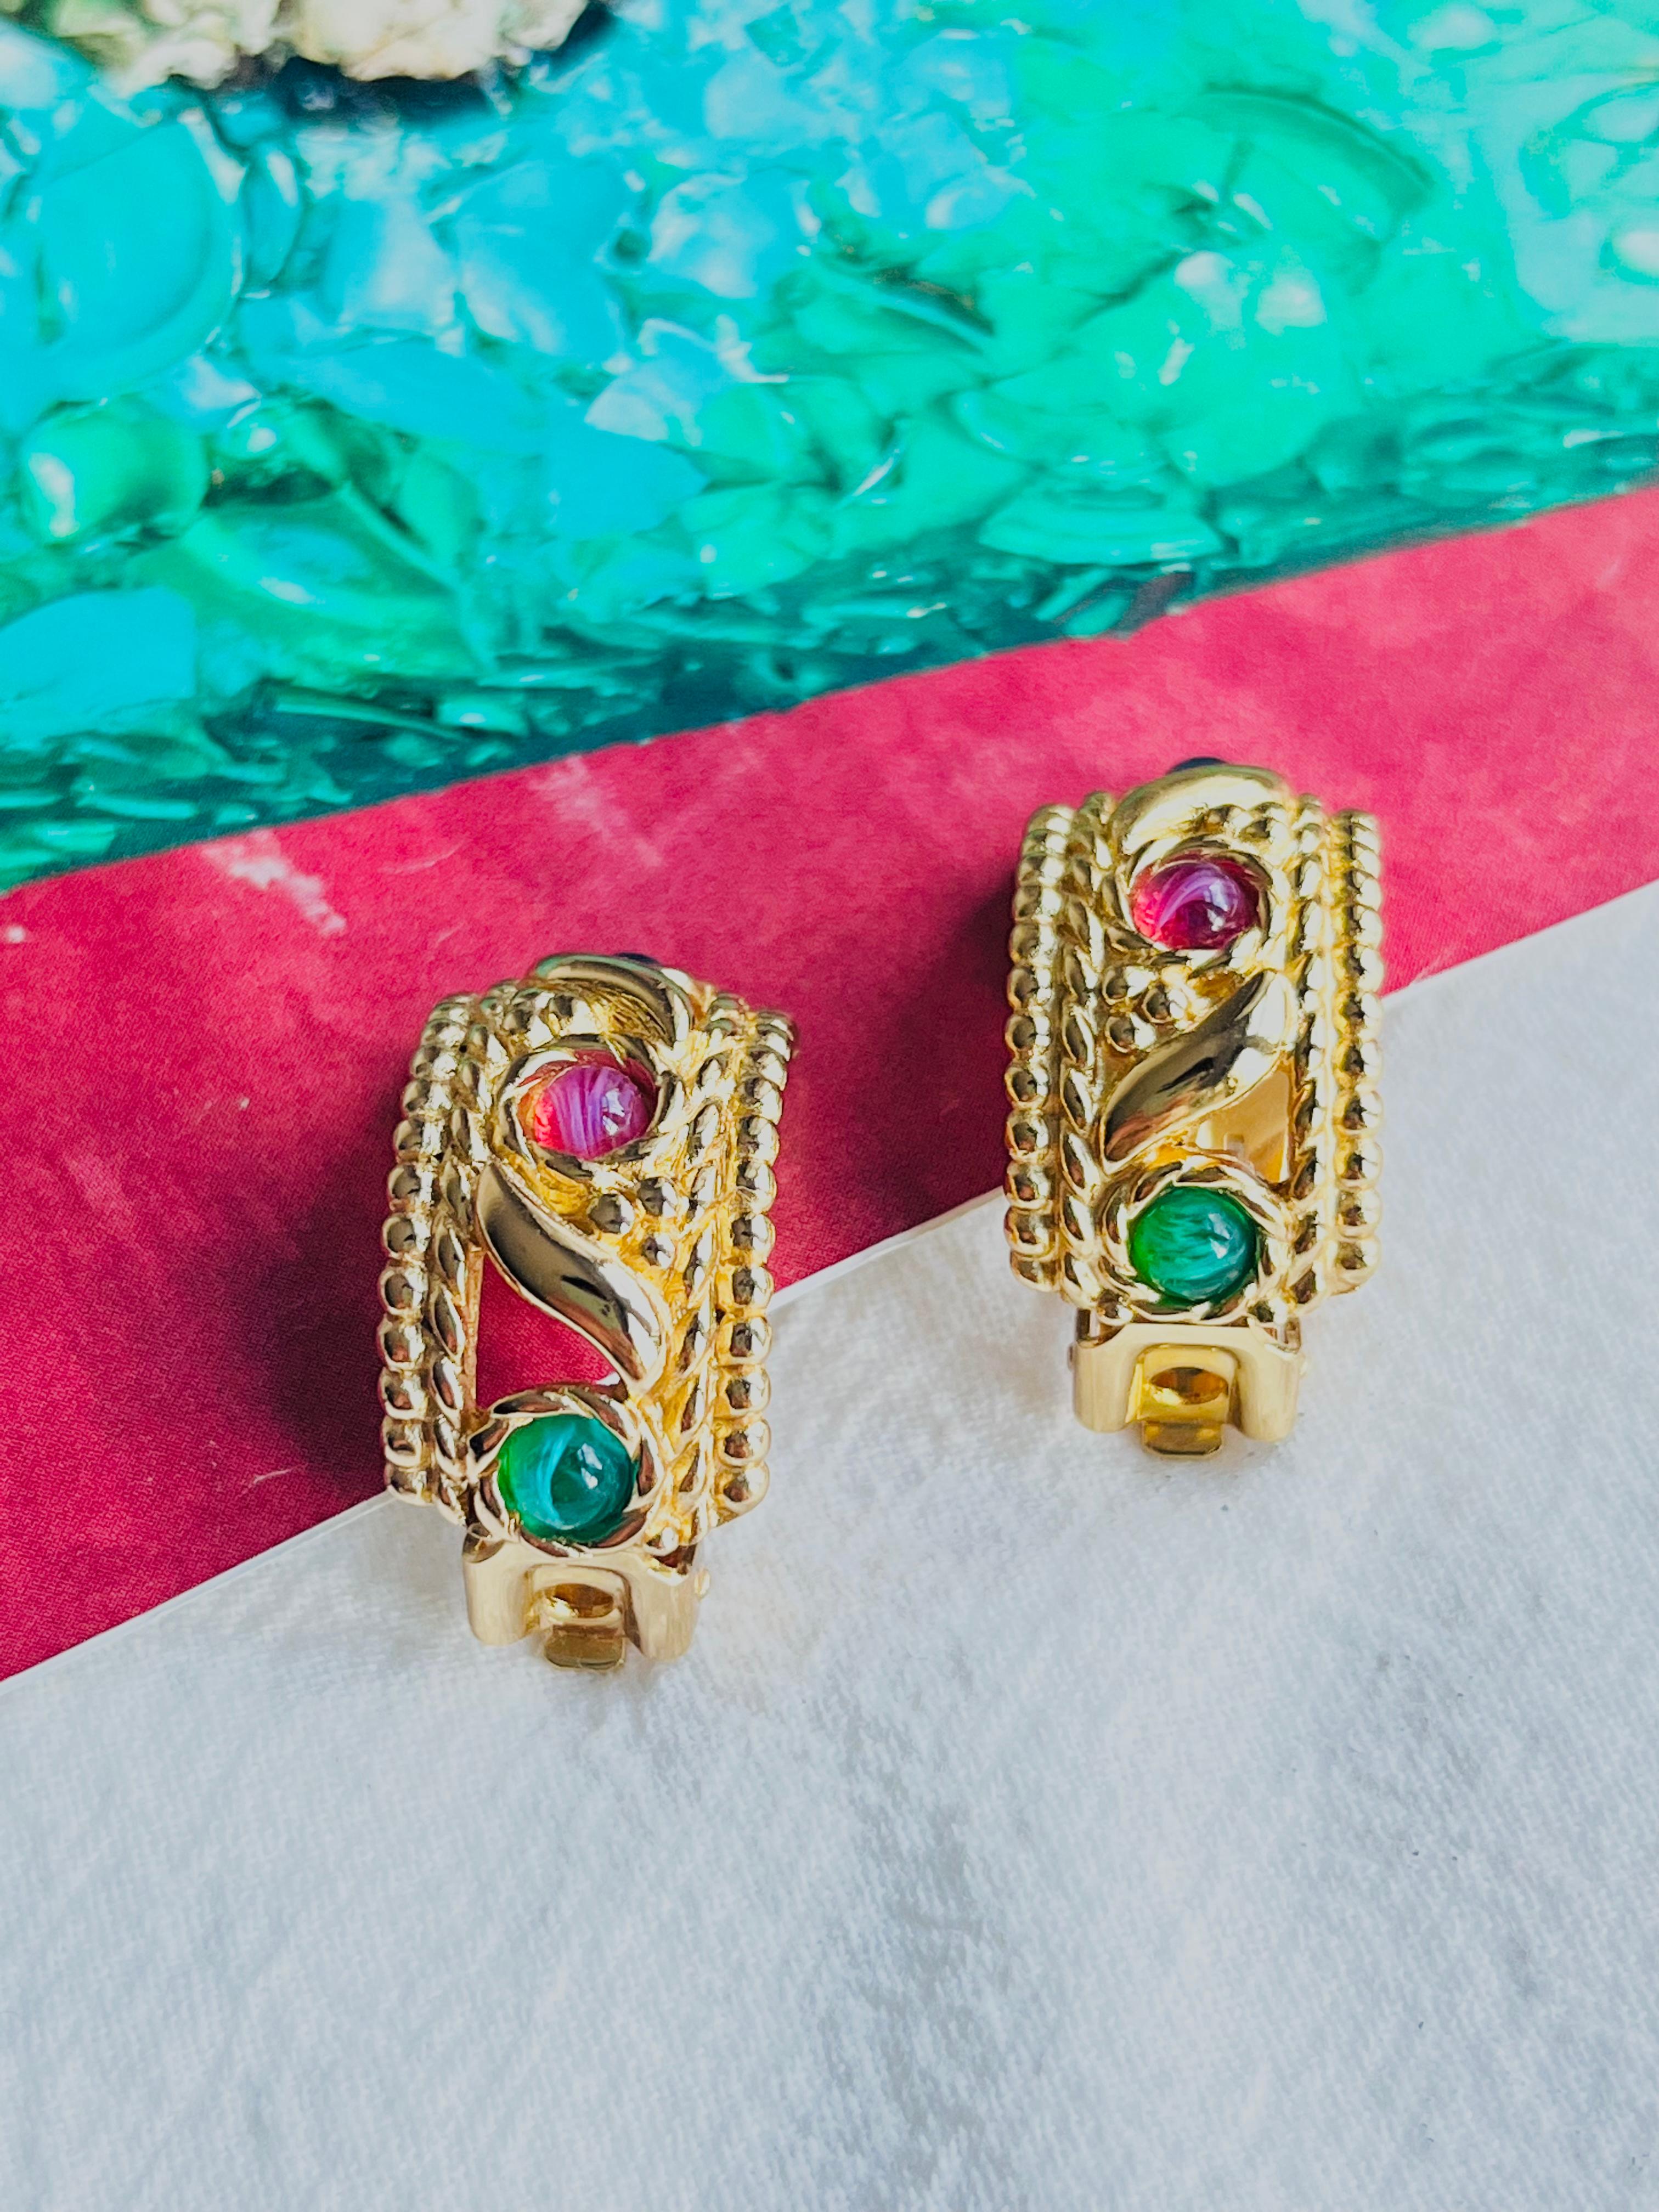 Christian Dior Vintage 1970s Baroque Gripoix Emerald Sapphire Ruby Clip Earrings In Excellent Condition For Sale In Wokingham, England